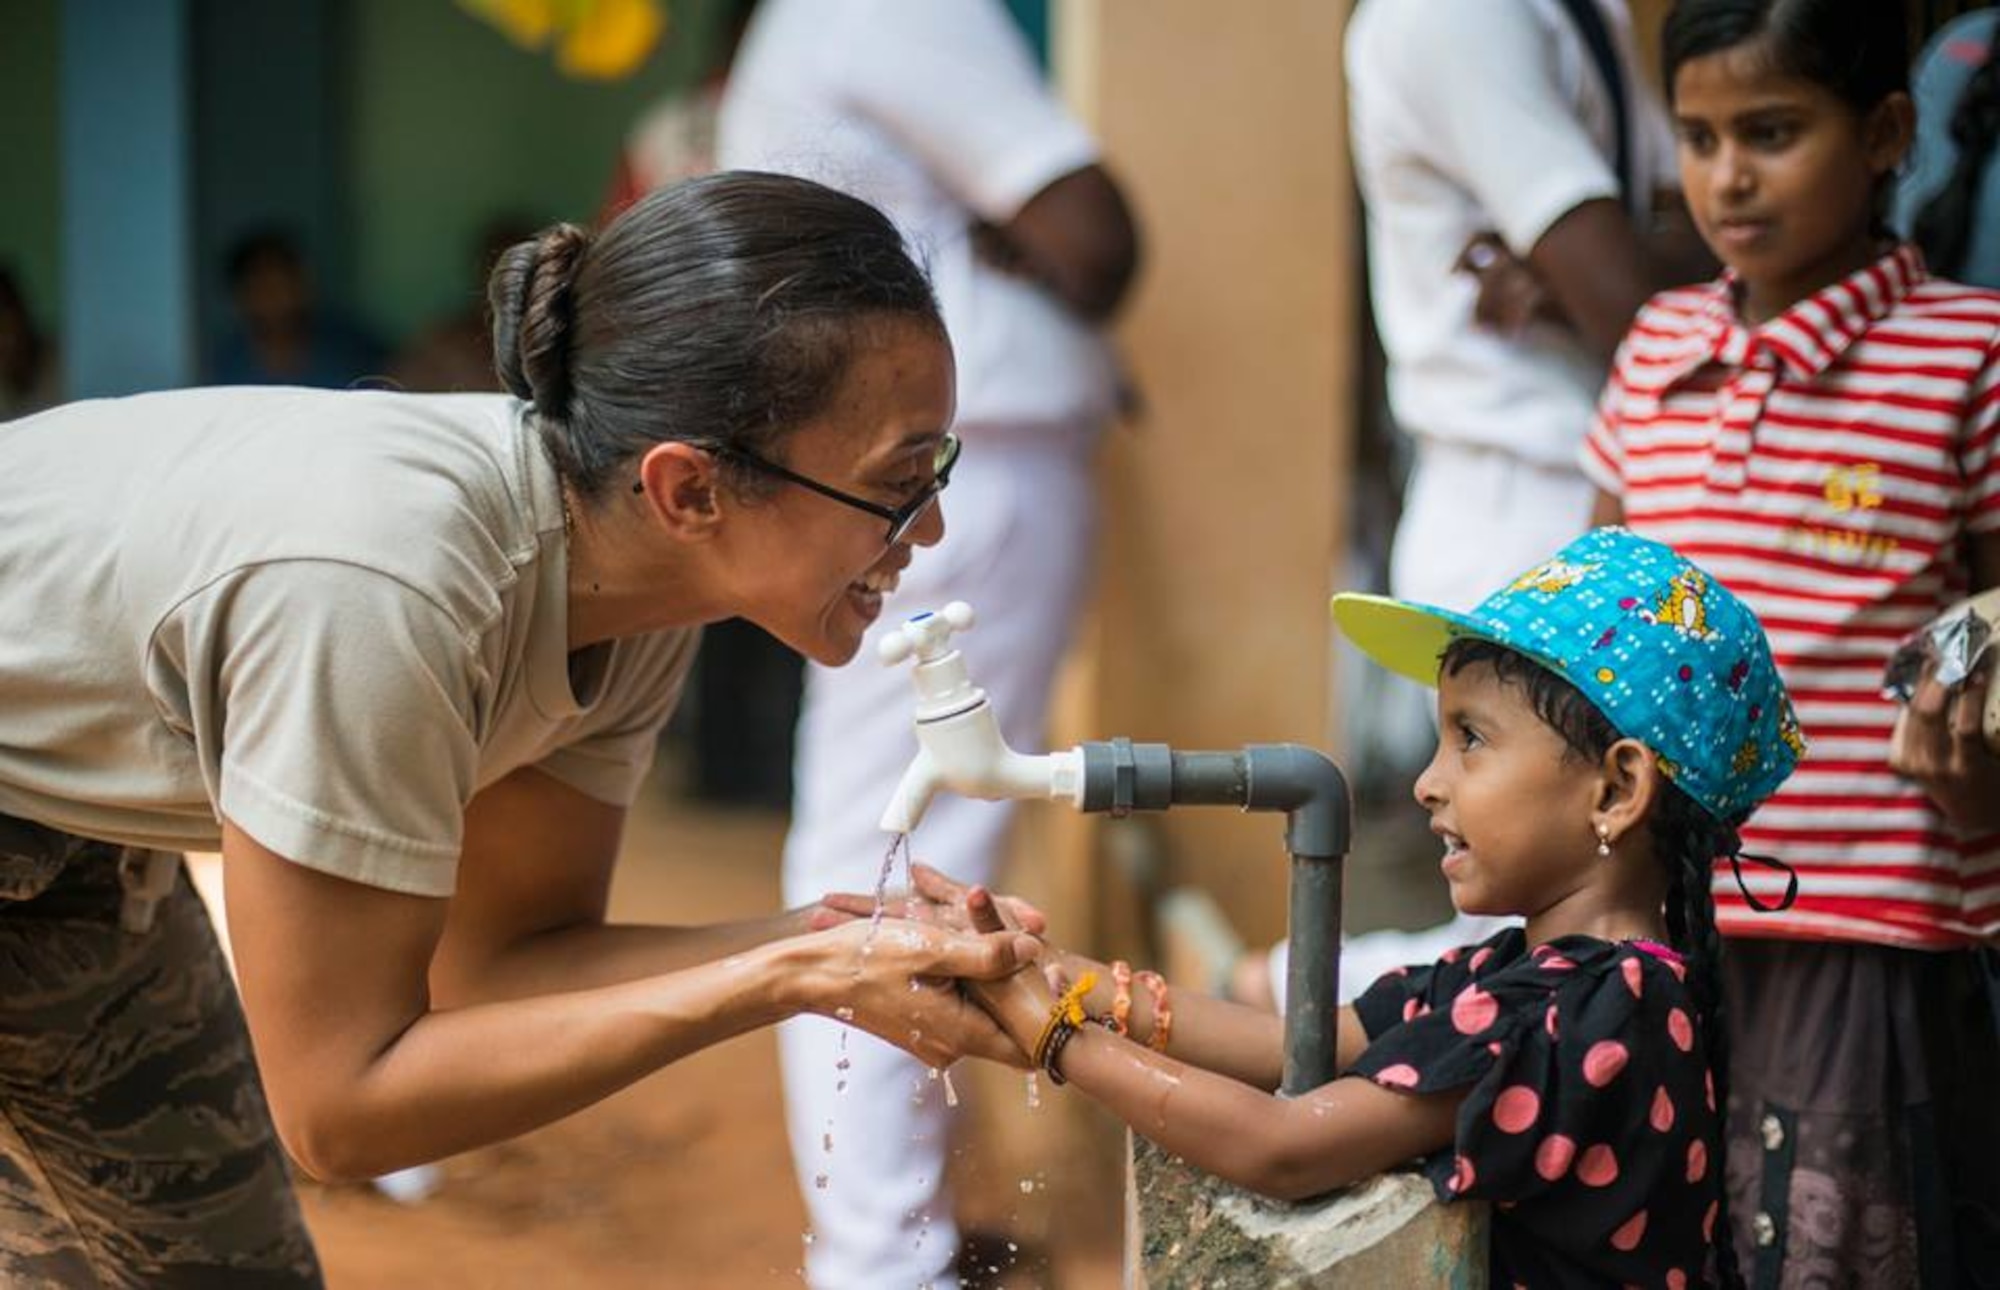 Staff Sgt. Yesenia Benjamin, an 18th Medical Group public health technician, teaches a Sri Lankan child how to properly wash her hands during Pacific Angel 16-3 in Jaffna, Sri Lanka, Aug. 16, 2016. Now entering its ninth year, Operation Pacific Angel ensures that the region’s militaries are prepared to work together to address humanitarian crises. Since 2007, Pacific Angel operations have improved the lives of tens of thousands of people. (U.S. Air Force photo/Senior Airman Brittany A. Chase)